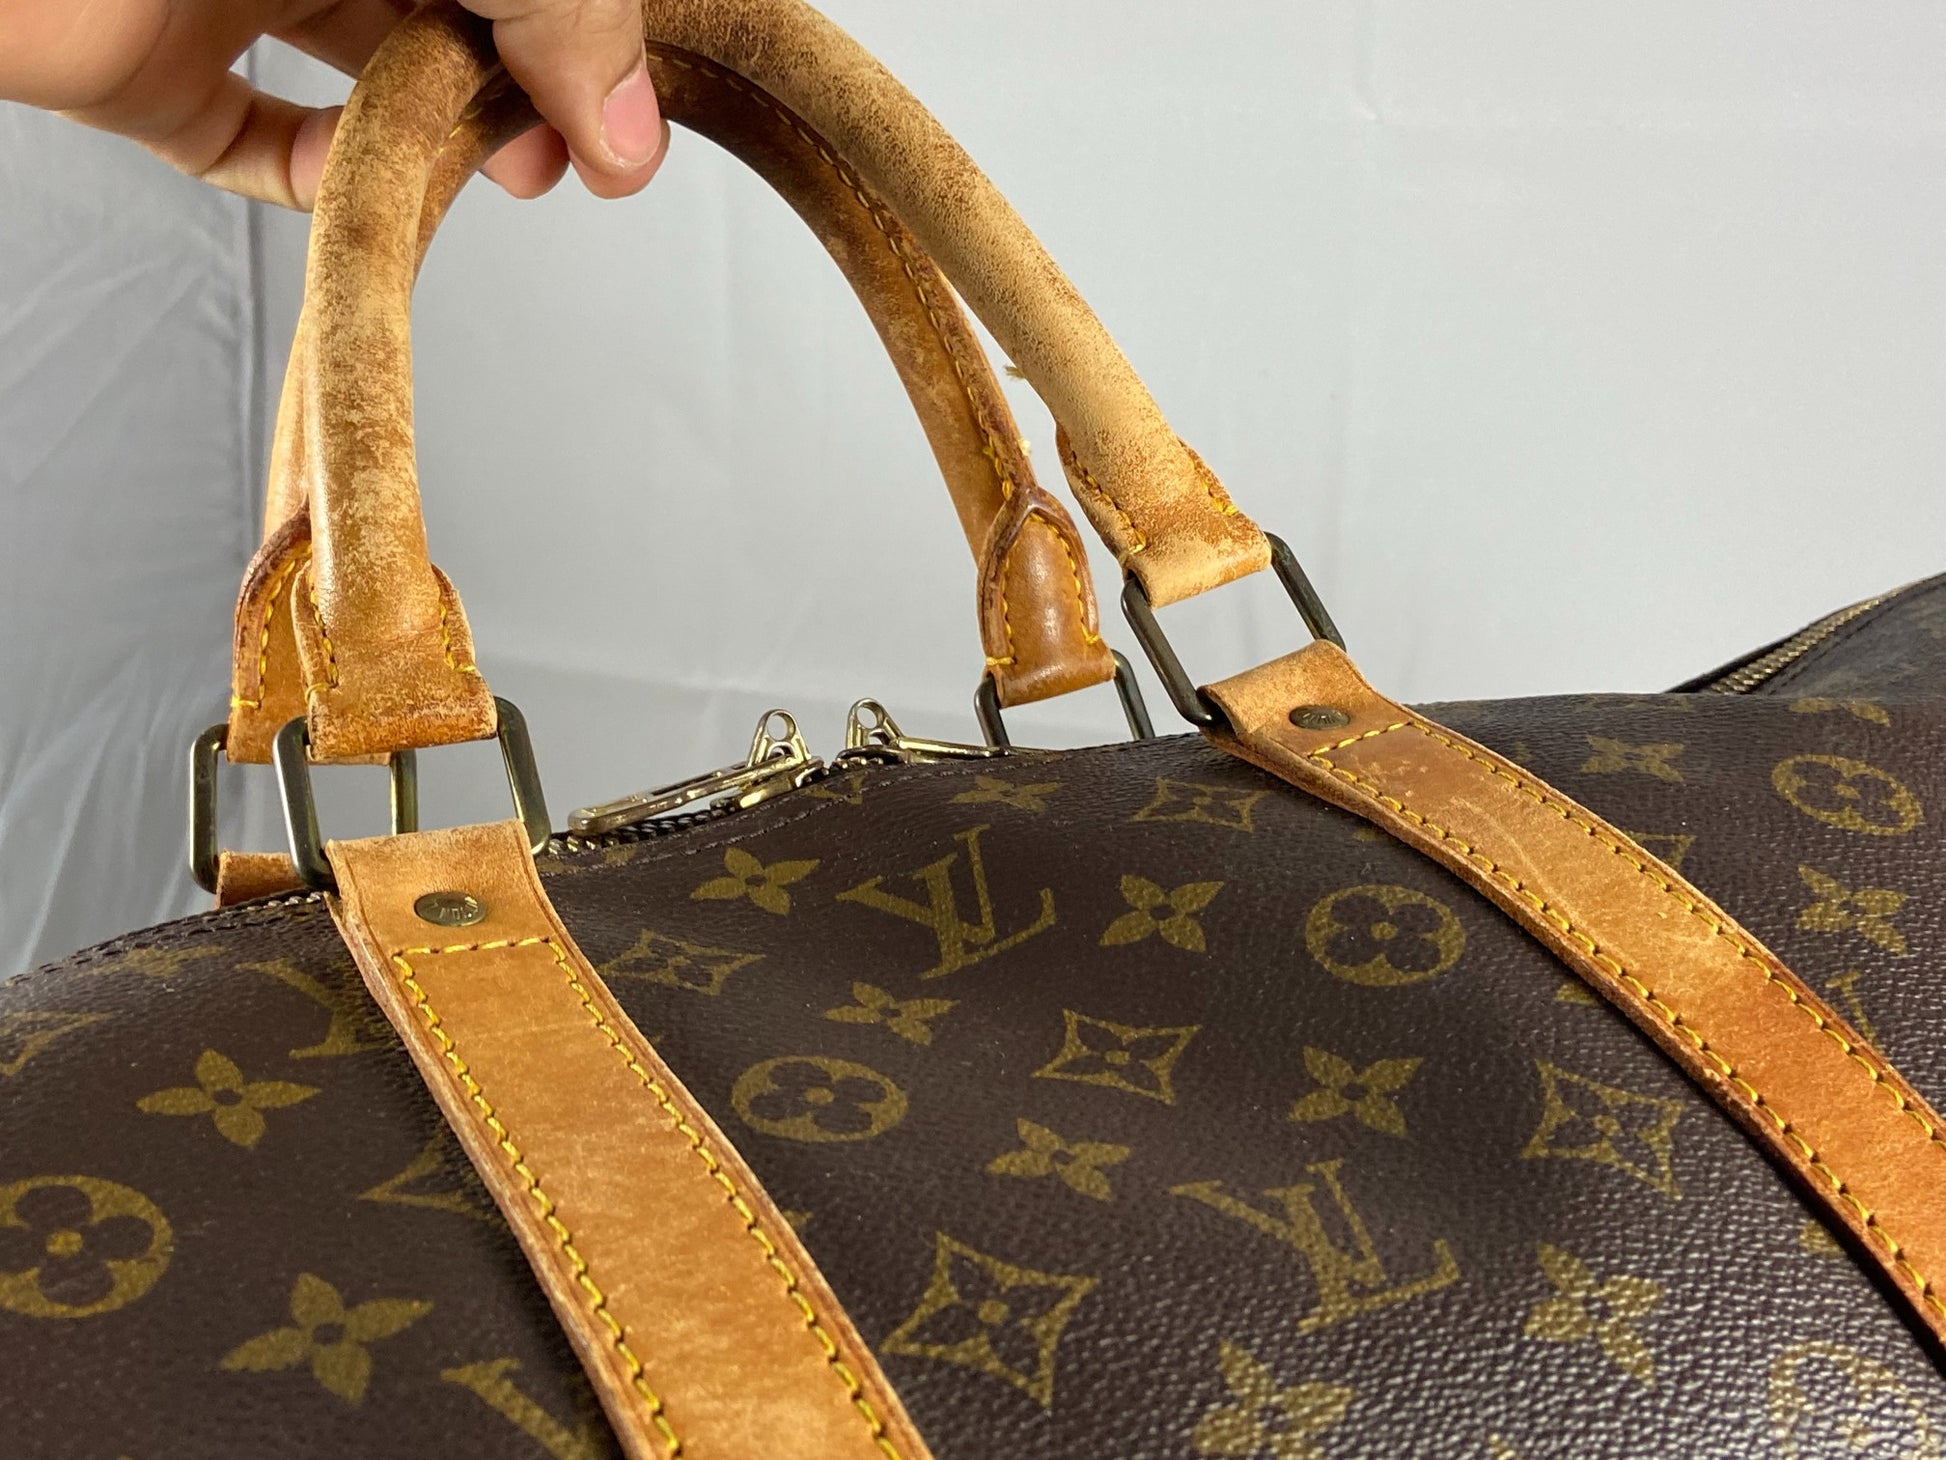 LOUIS VUITTON. Keepall 55 bag in monogram canvas and nat…